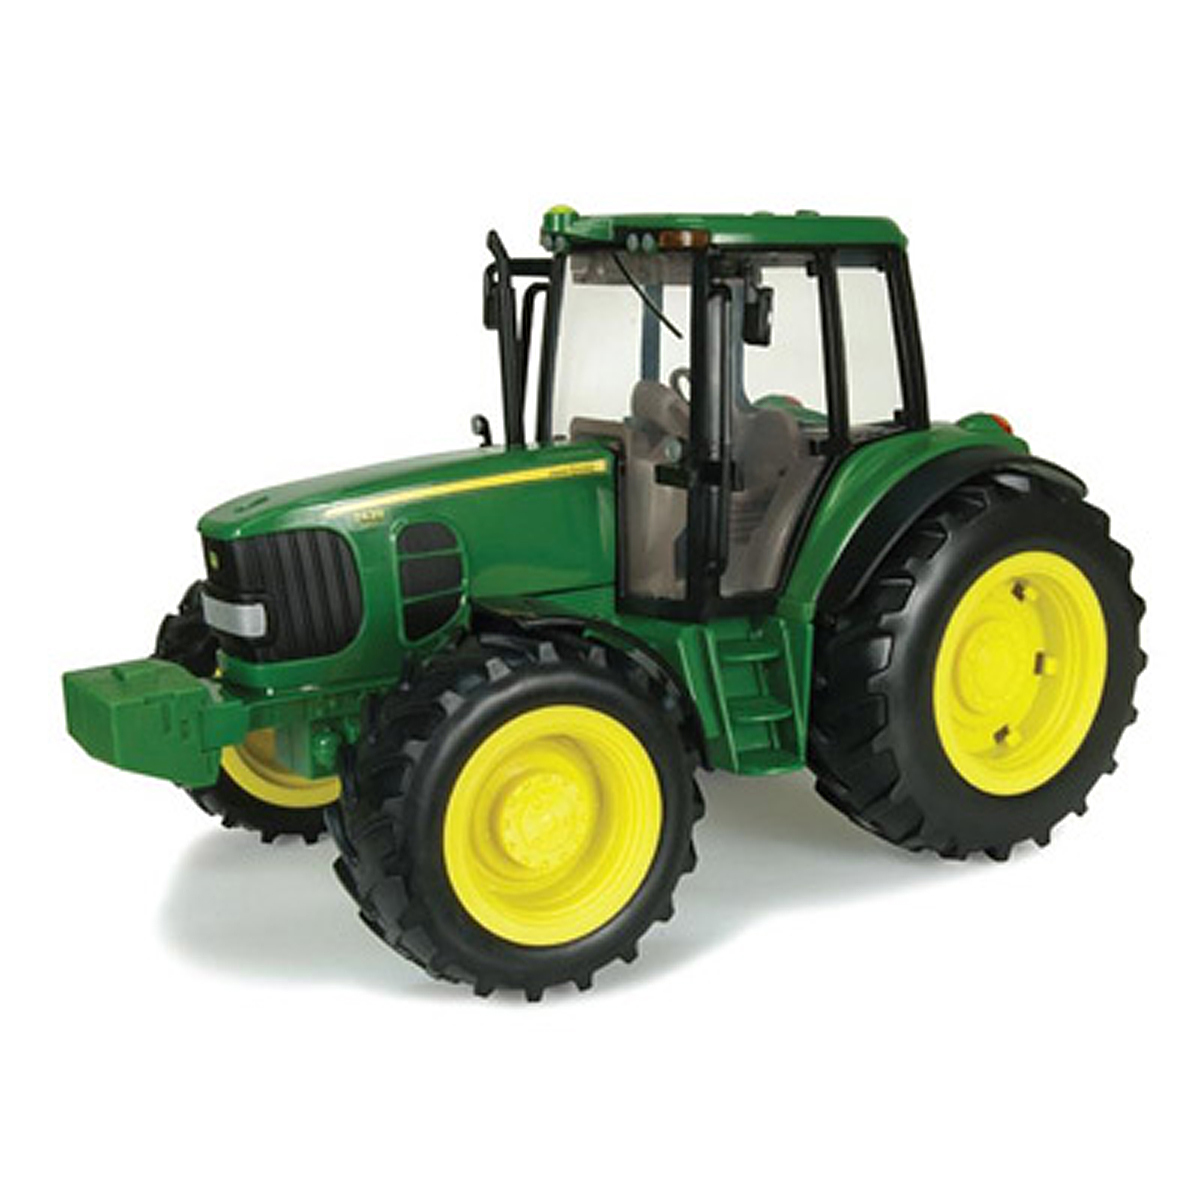 Big Farm 1/16 Scale 7330 Tractor with Lights 'N' Sound